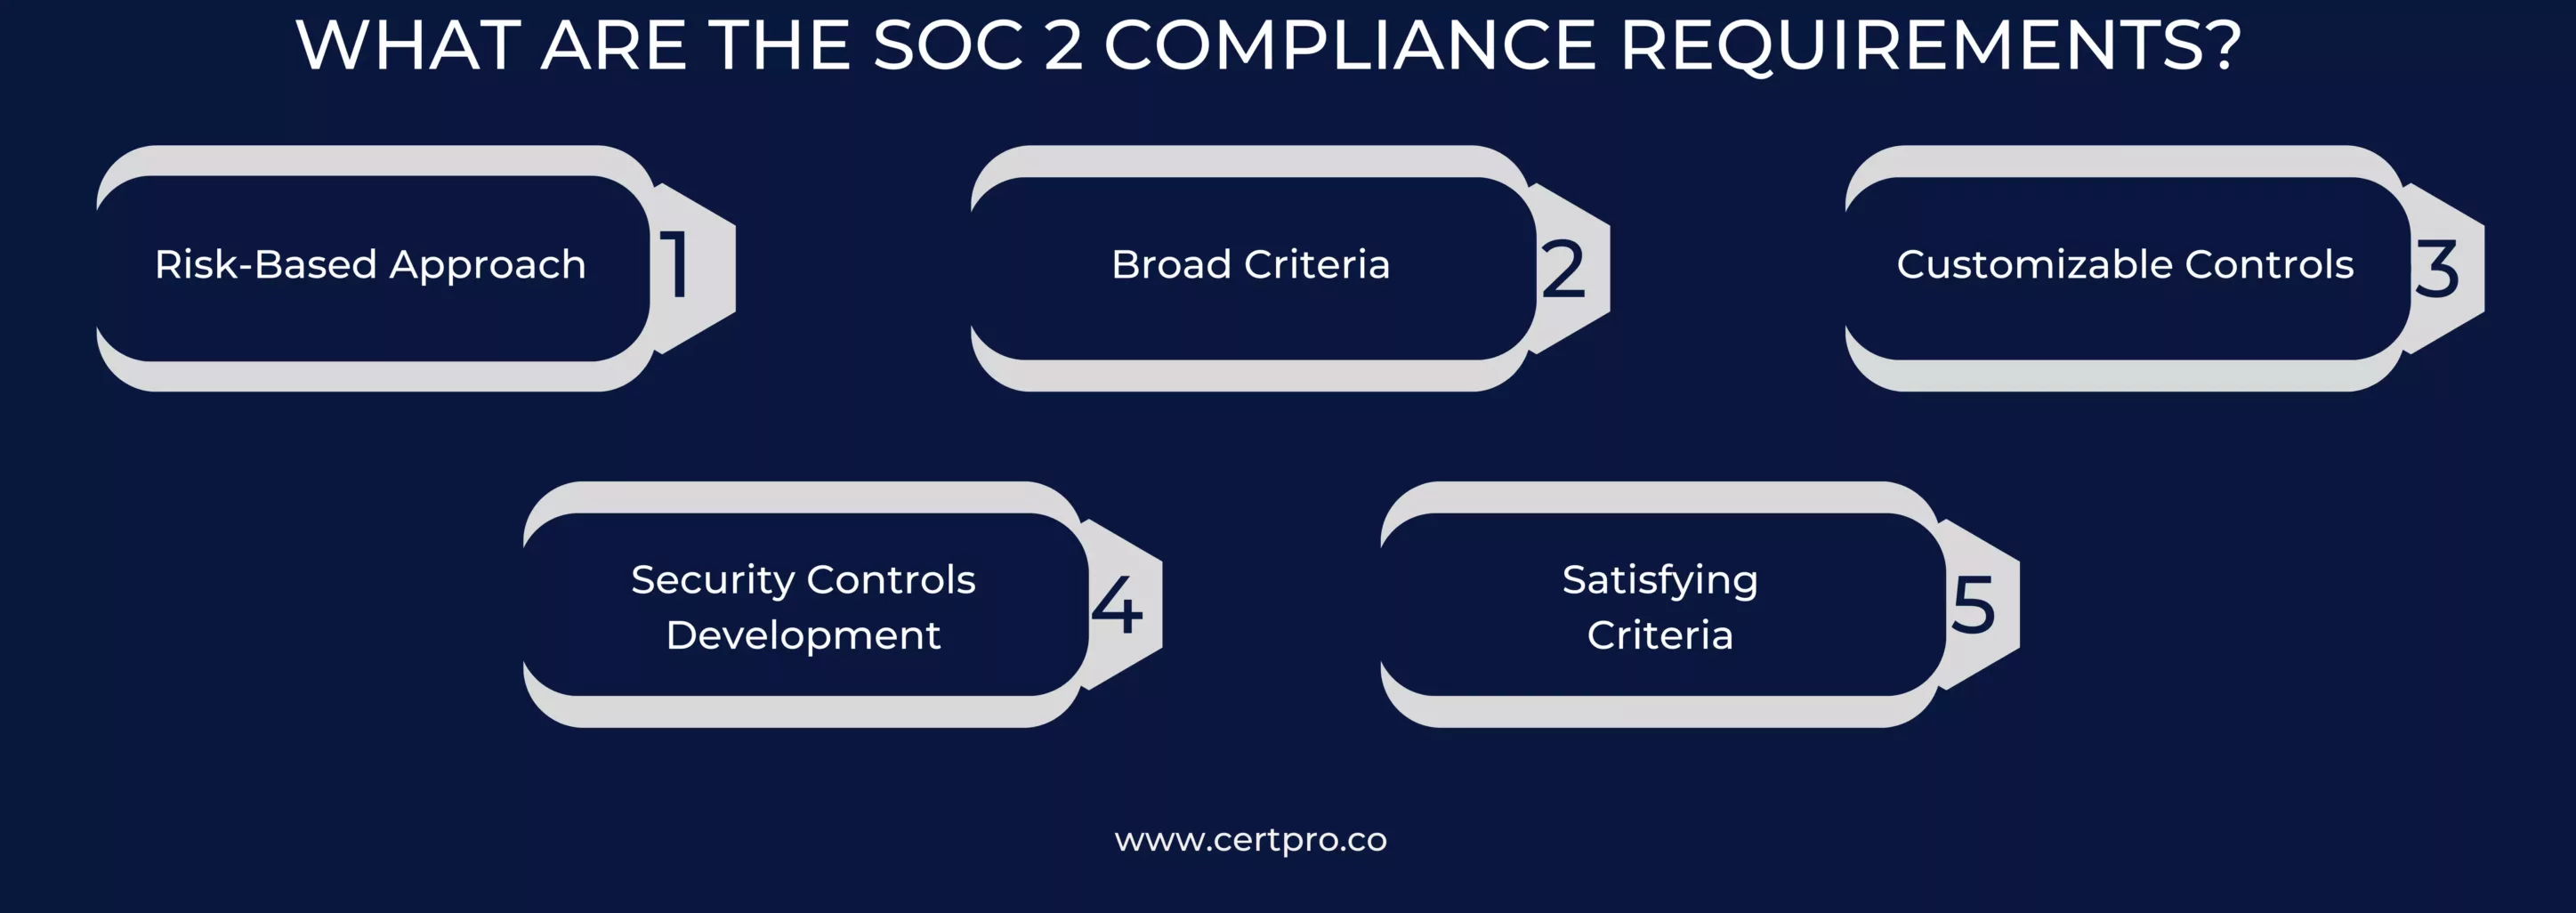 WHAT ARE THE REQUIREMENTS OF SOC-2